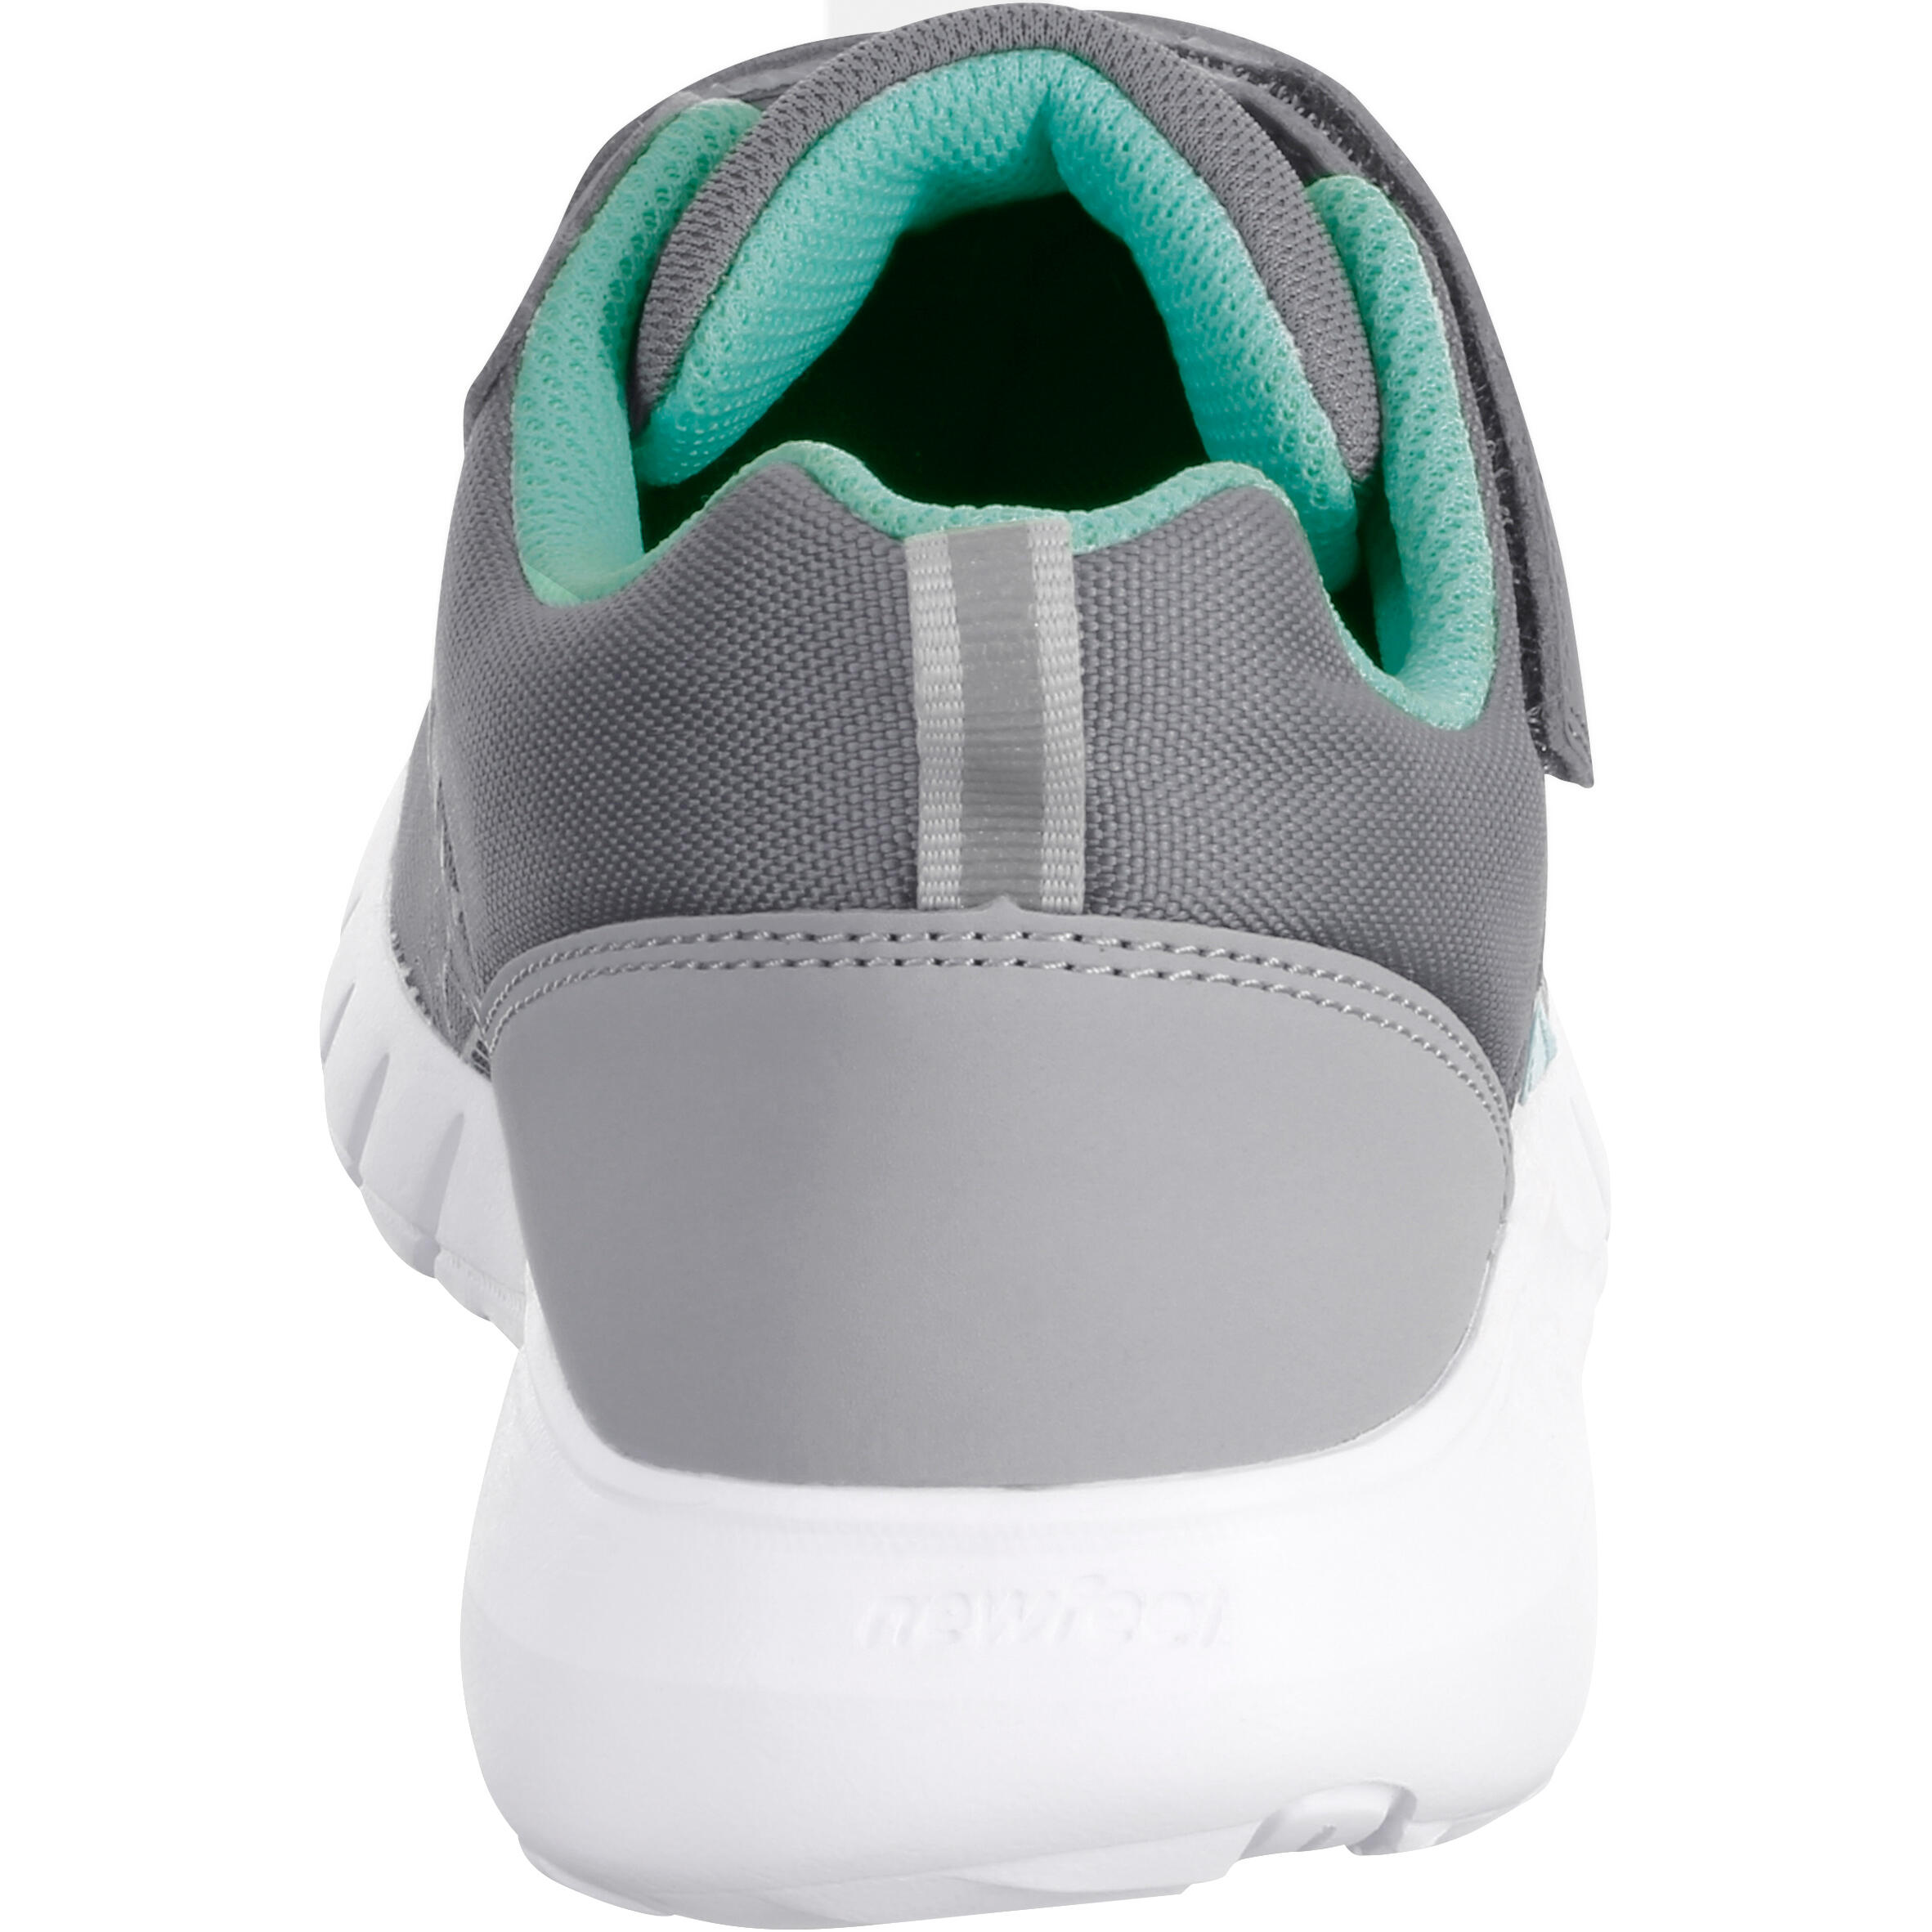 Soft 140 children's fitness walking shoes grey/turquoise 6/12